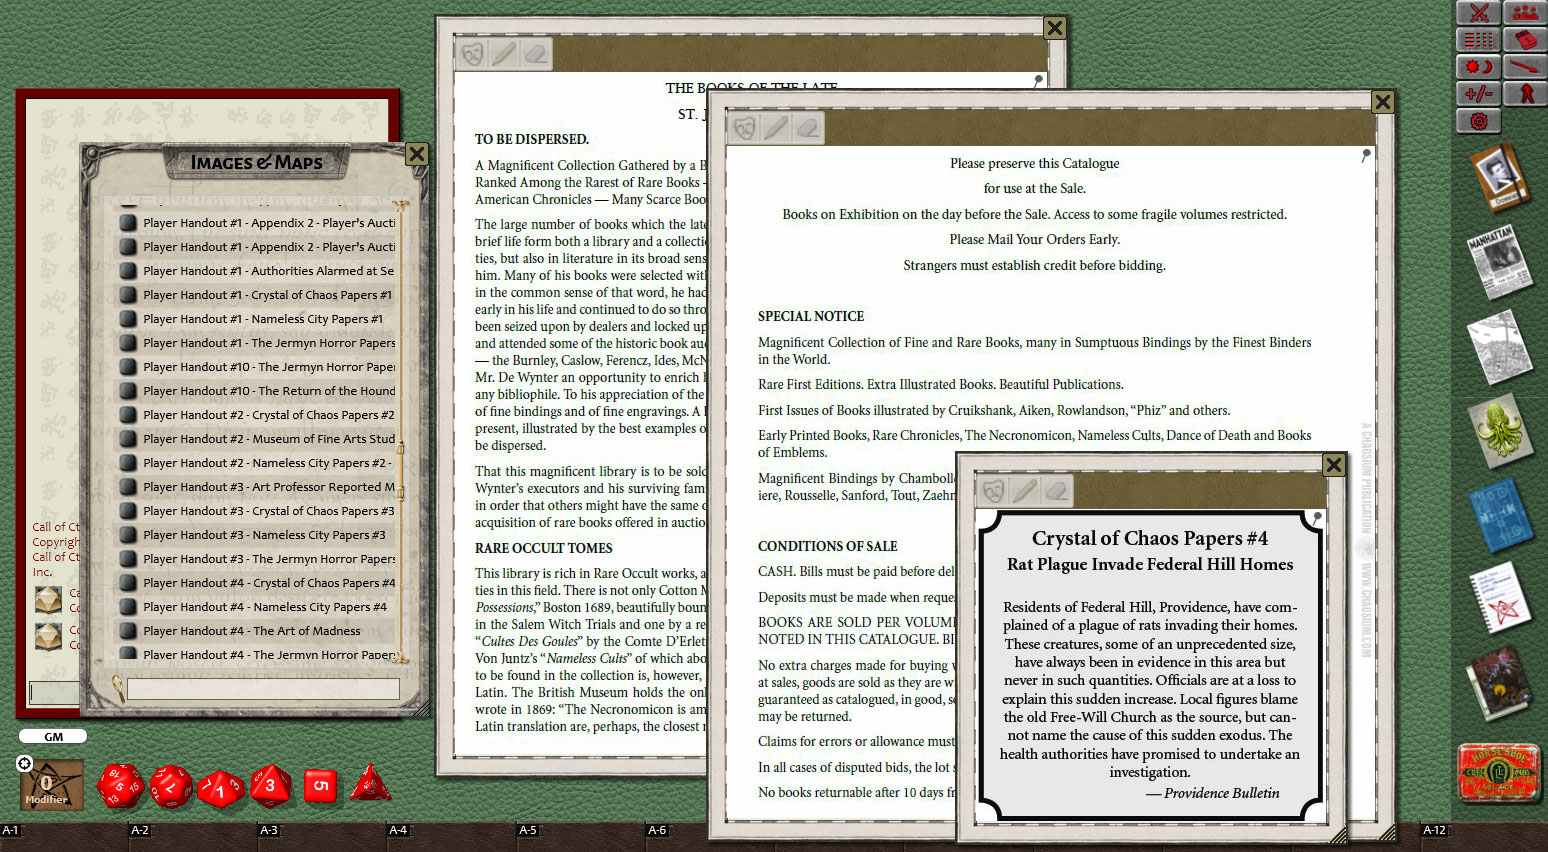 Fantasy Grounds - Call of Cthulhu: The House of R'lyeh screenshot